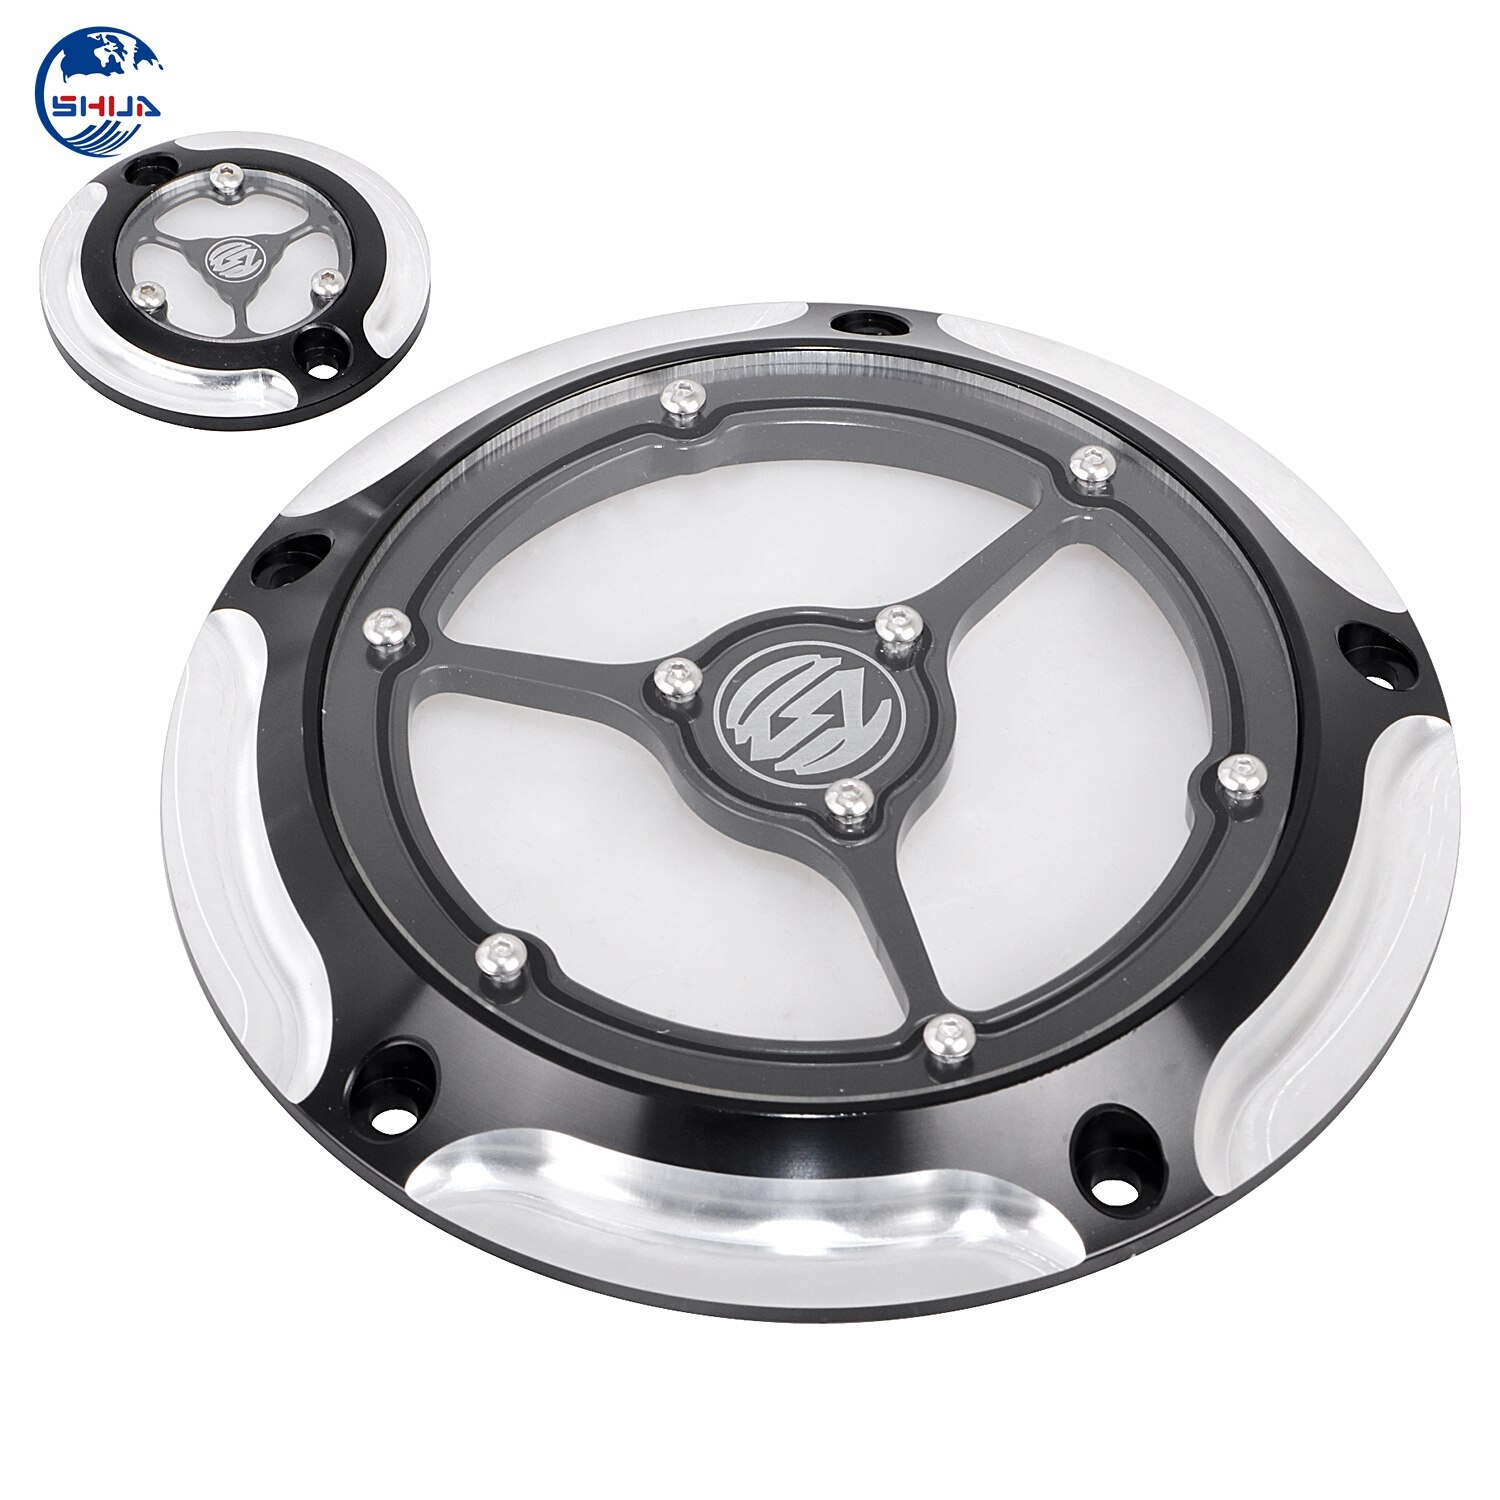 Motorcycle Cnc Aluminium Derby Cover Timing Timer Voor Harley Electra Street Glide Road King Speciale Fltrxs Fltrx Flhr